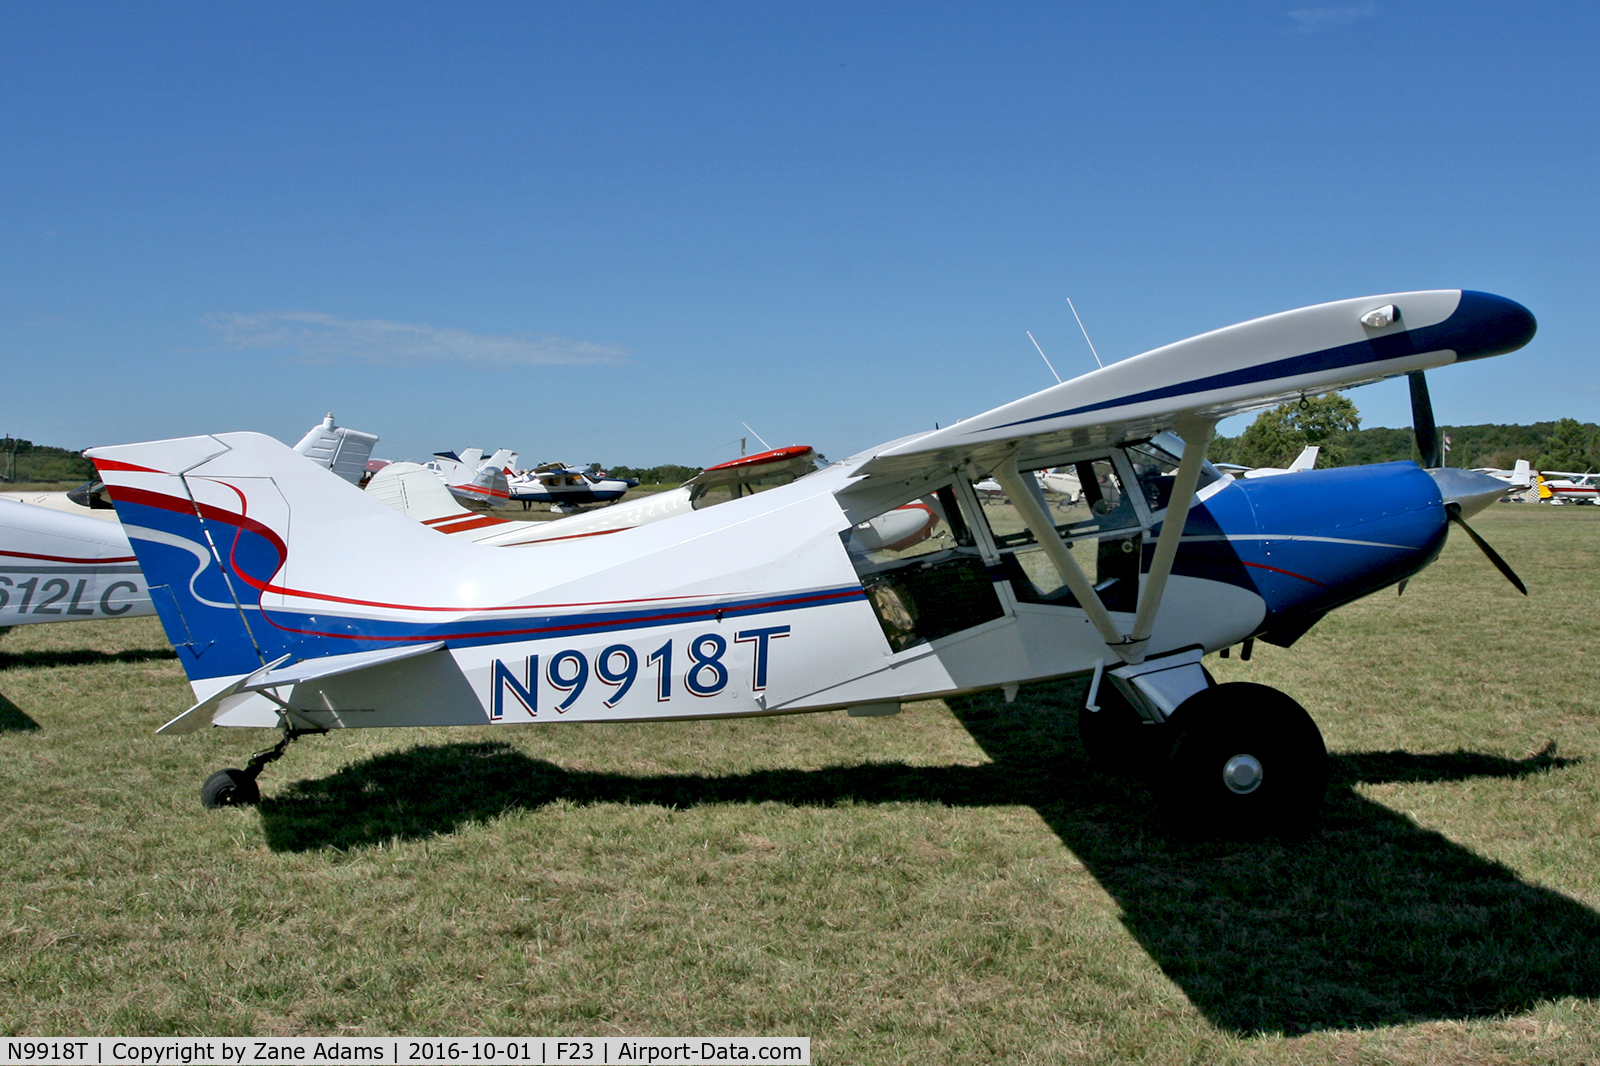 N9918T, 1987 Maule M-6-235 Super Rocket C/N 7491C, At the 2016 Ranger, Texas Fly-in